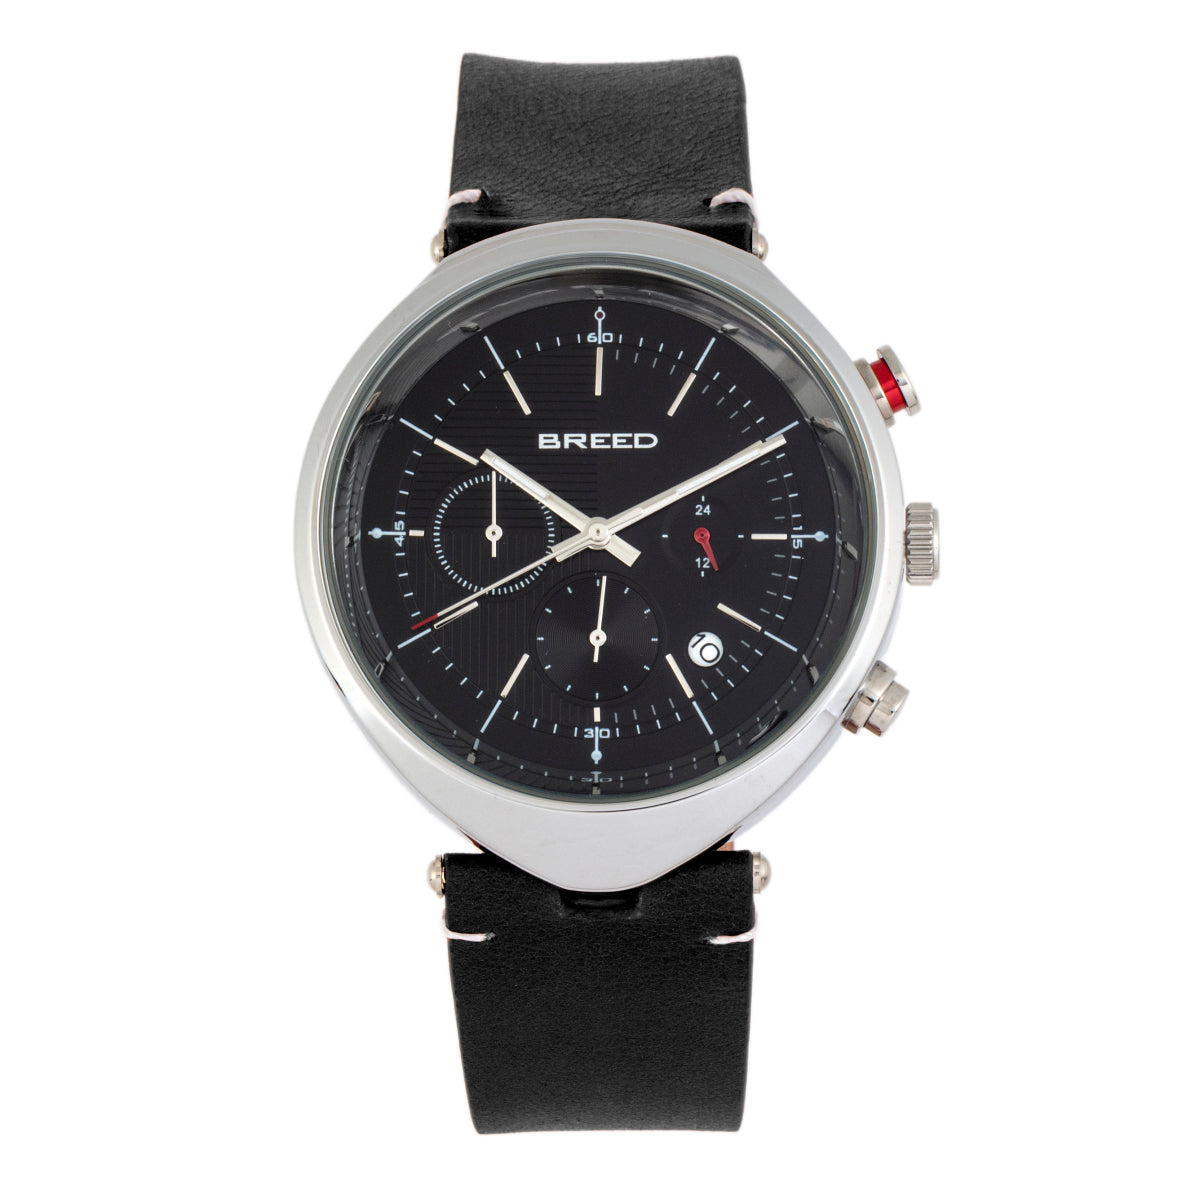 Breed Tempest Chronograph Leather-Band Watch w/Date - Black - BRD8605